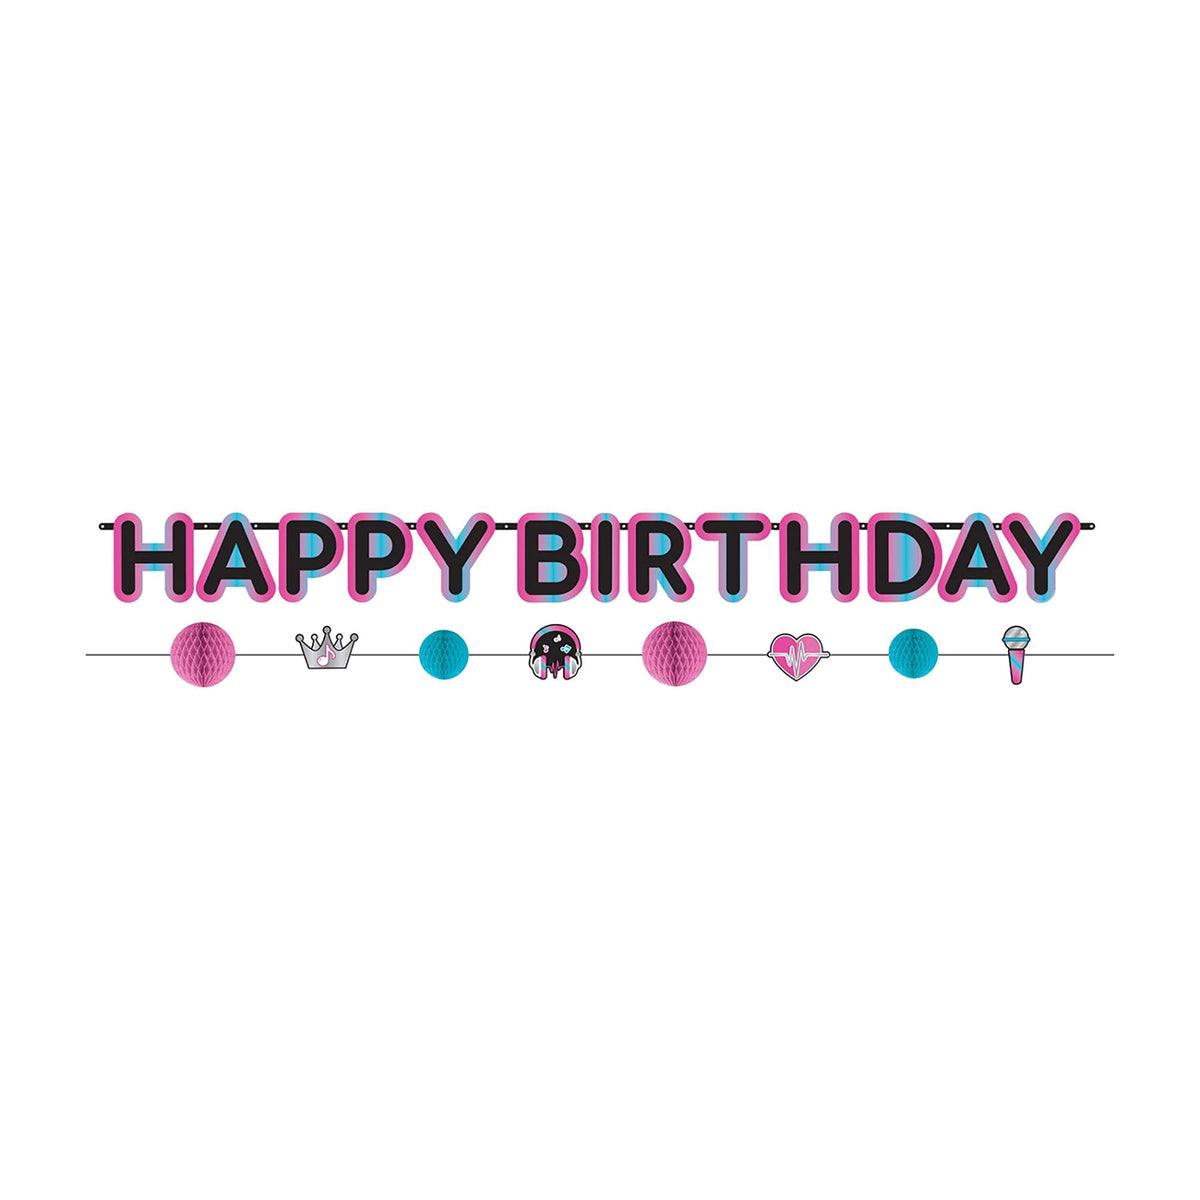 AMSCAN CA Kids Birthday Internet Famous Happy Birthday Paper Double Banner, 144 Inches, 2 Count